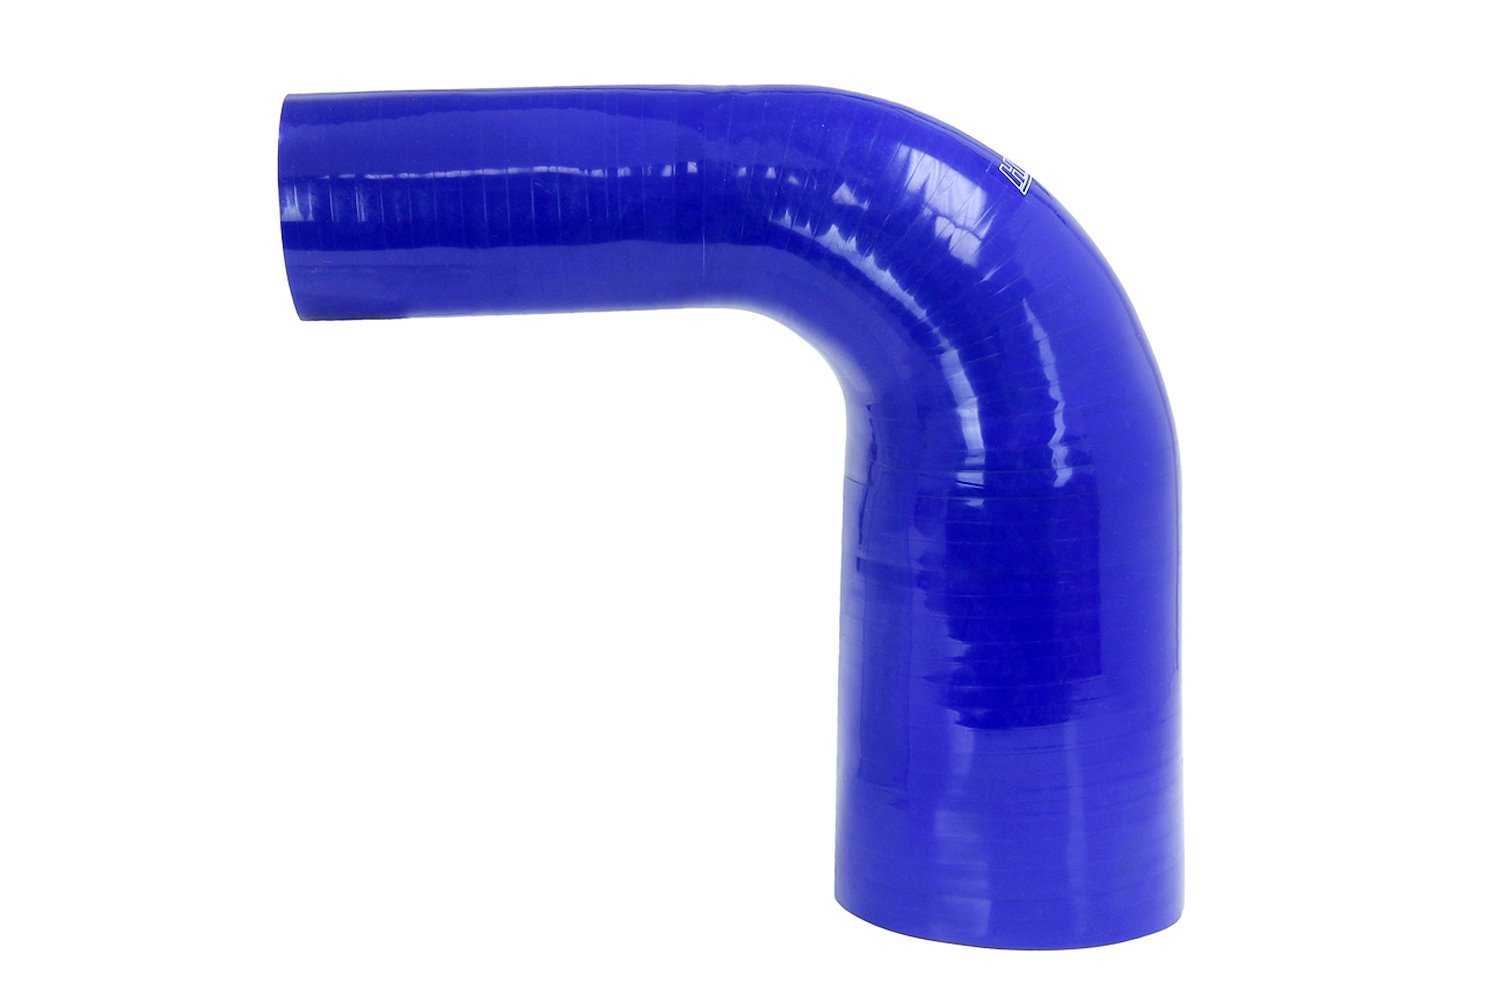 HTSER90-200-250-BLUE Silicone 90-Degree Elbow Hose, High-Temp 4-Ply Reinforced, 2 in. - 2-1/2 in. ID, Blue